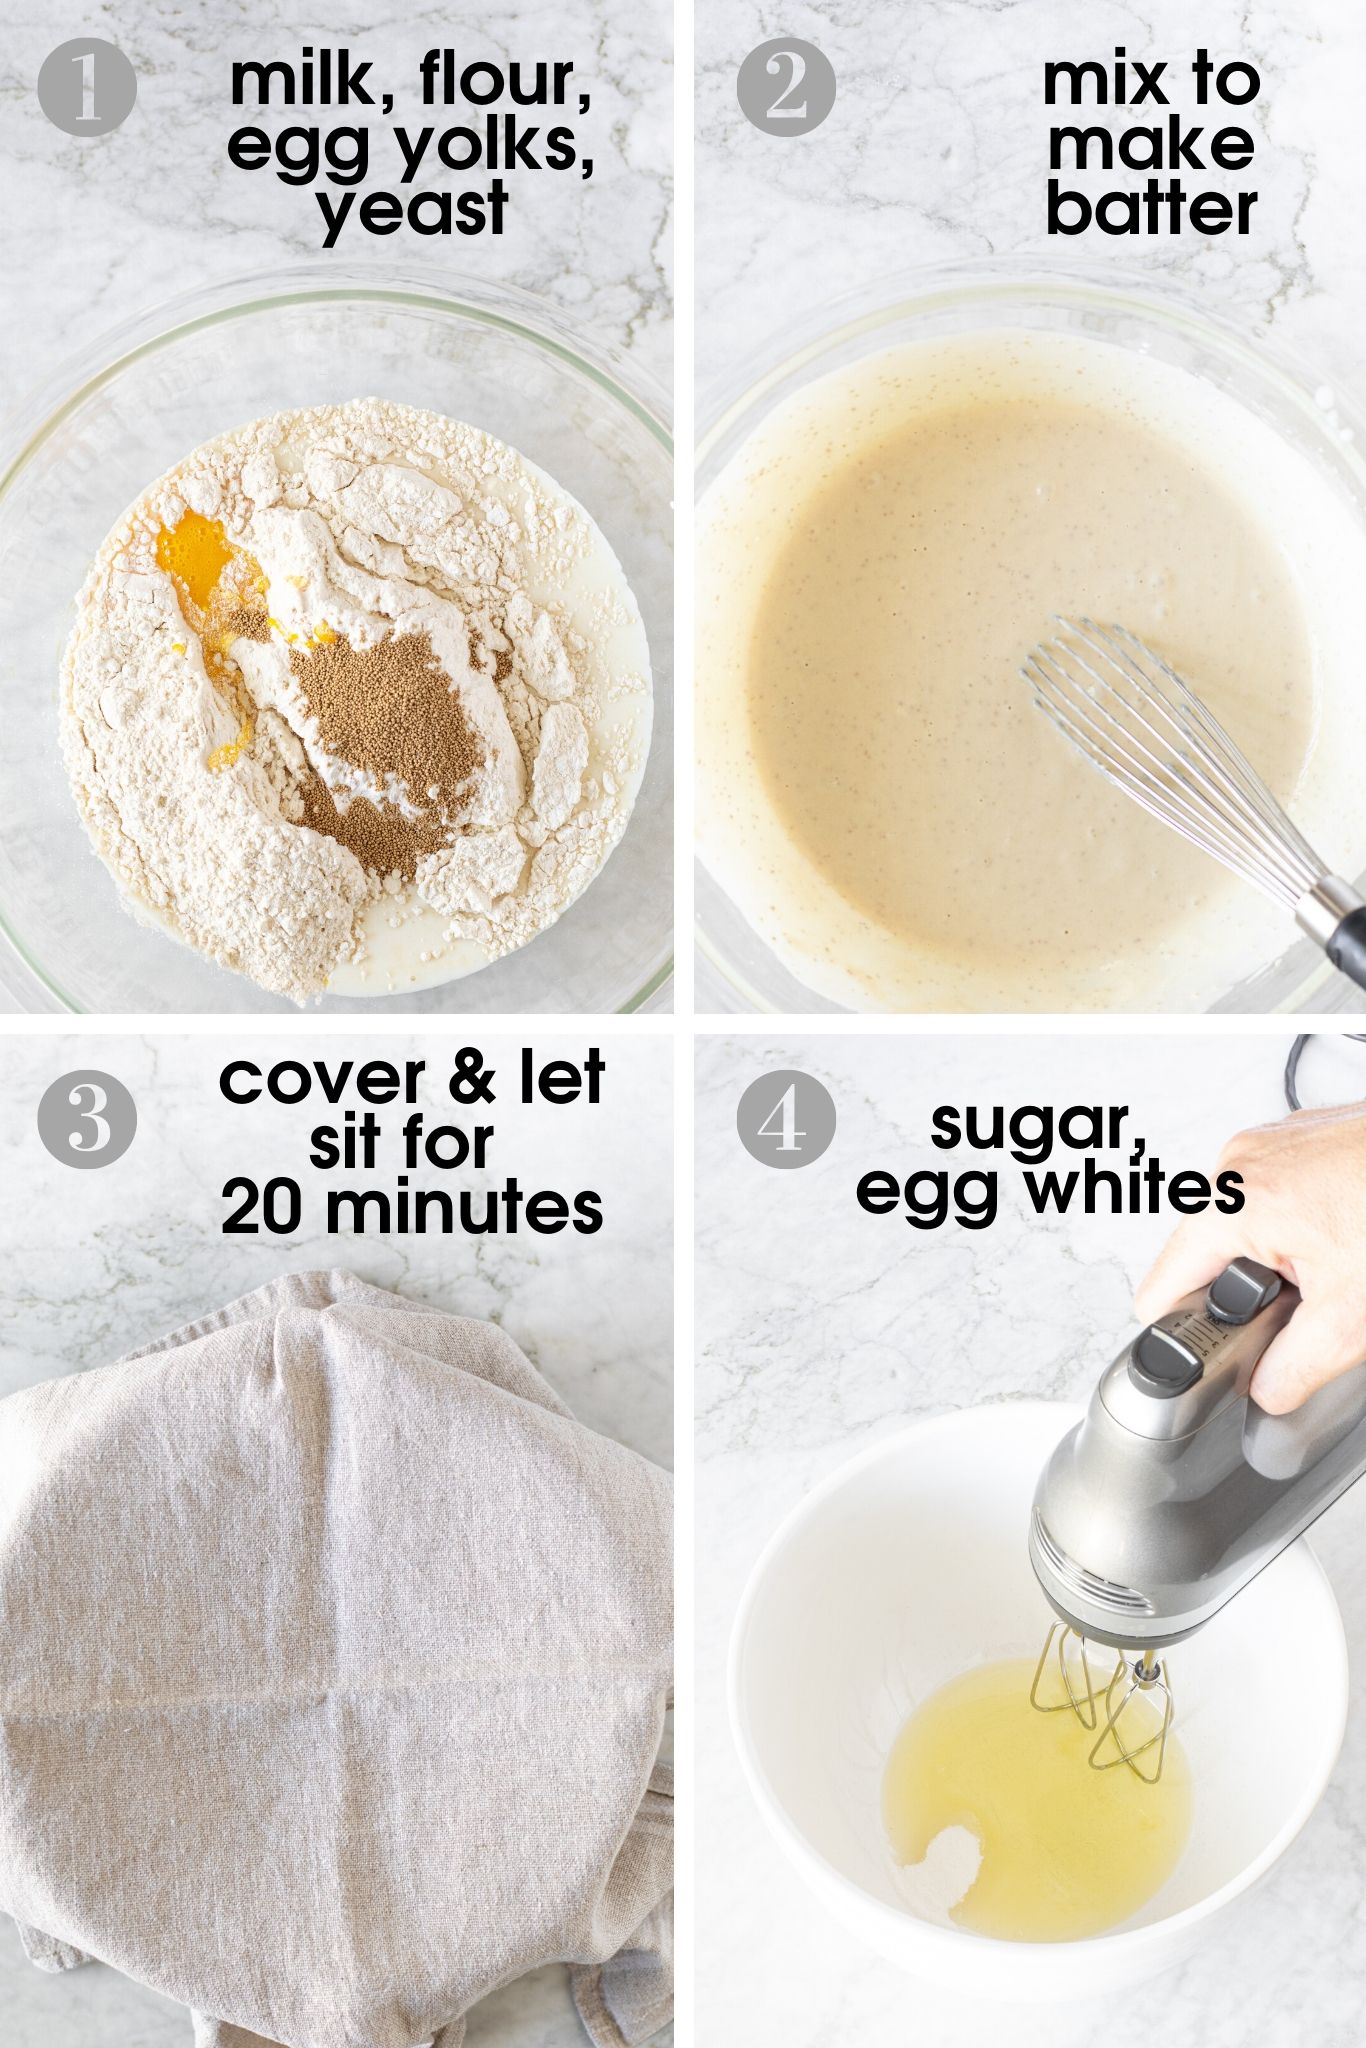 four photos showing how to mix batter for fluffy Bohemian pancakes, using milk, flour, egg yolks, yeast, sugar and egg whites | verygoodcook.com